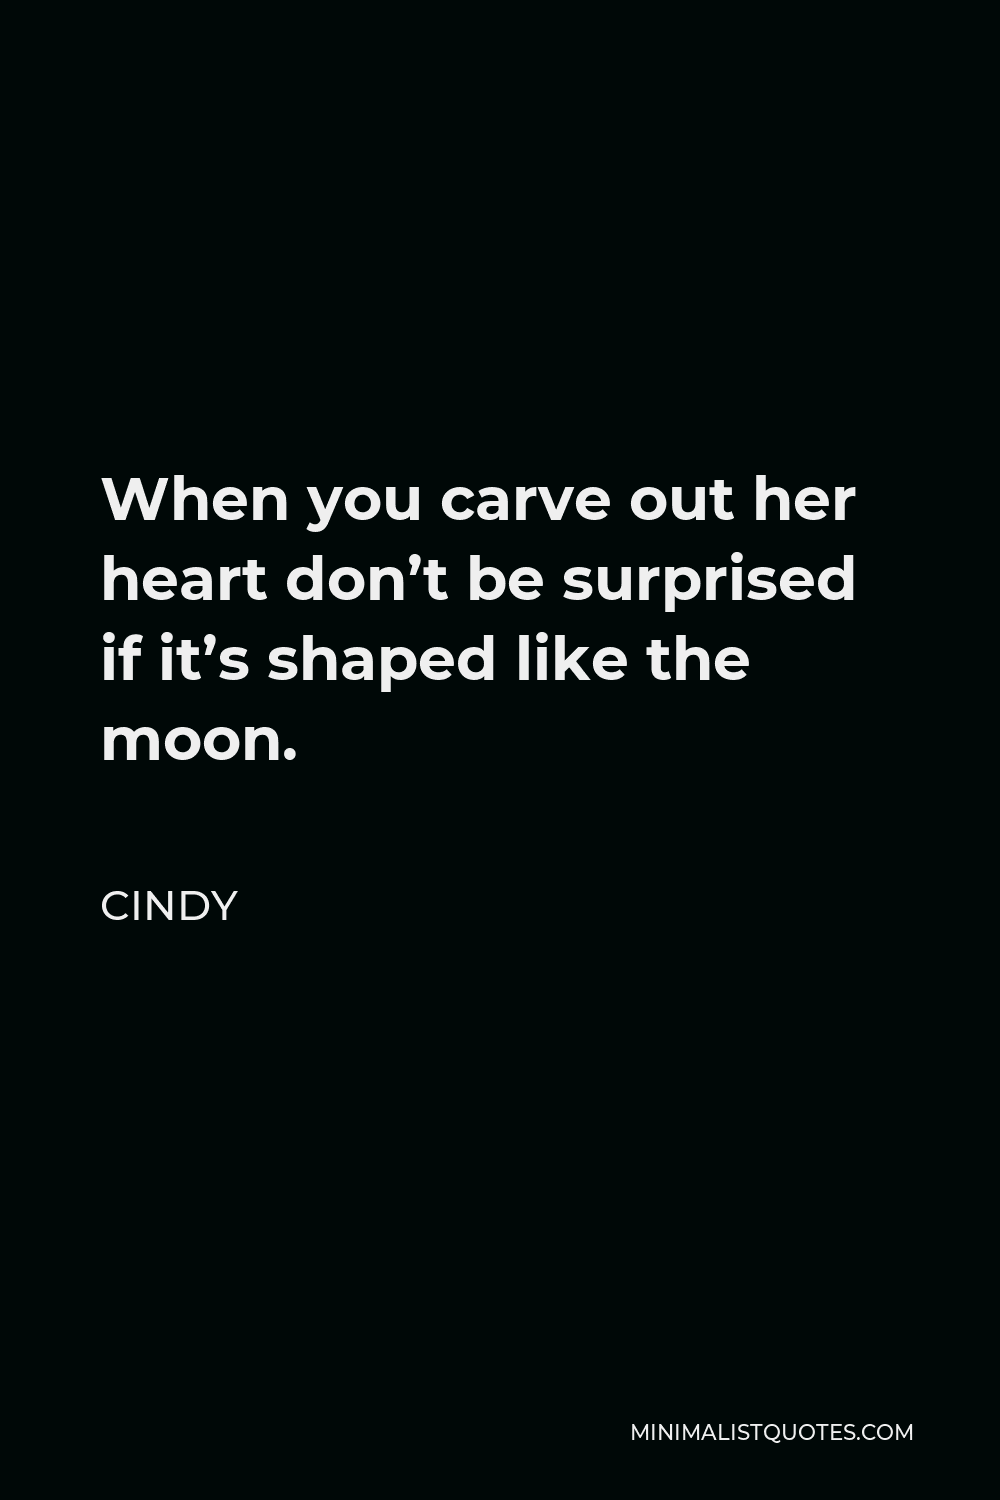 Cindy Quote - When you carve out her heart don’t be surprised if it’s shaped like the moon.